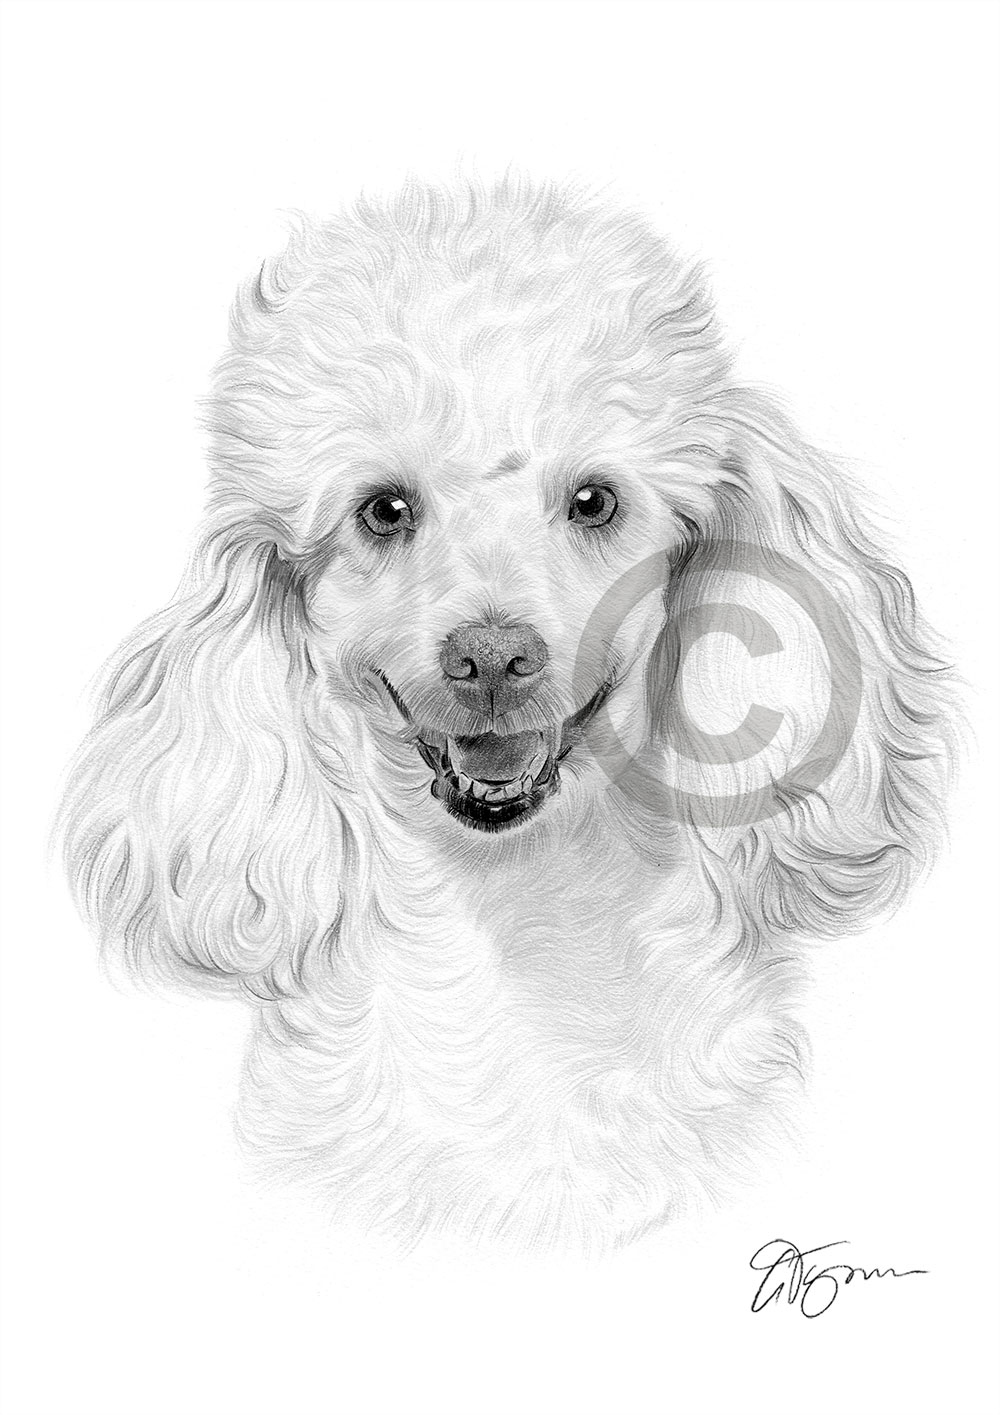 Pencil drawing of a young Toy Poodle by artist Gary Tymon